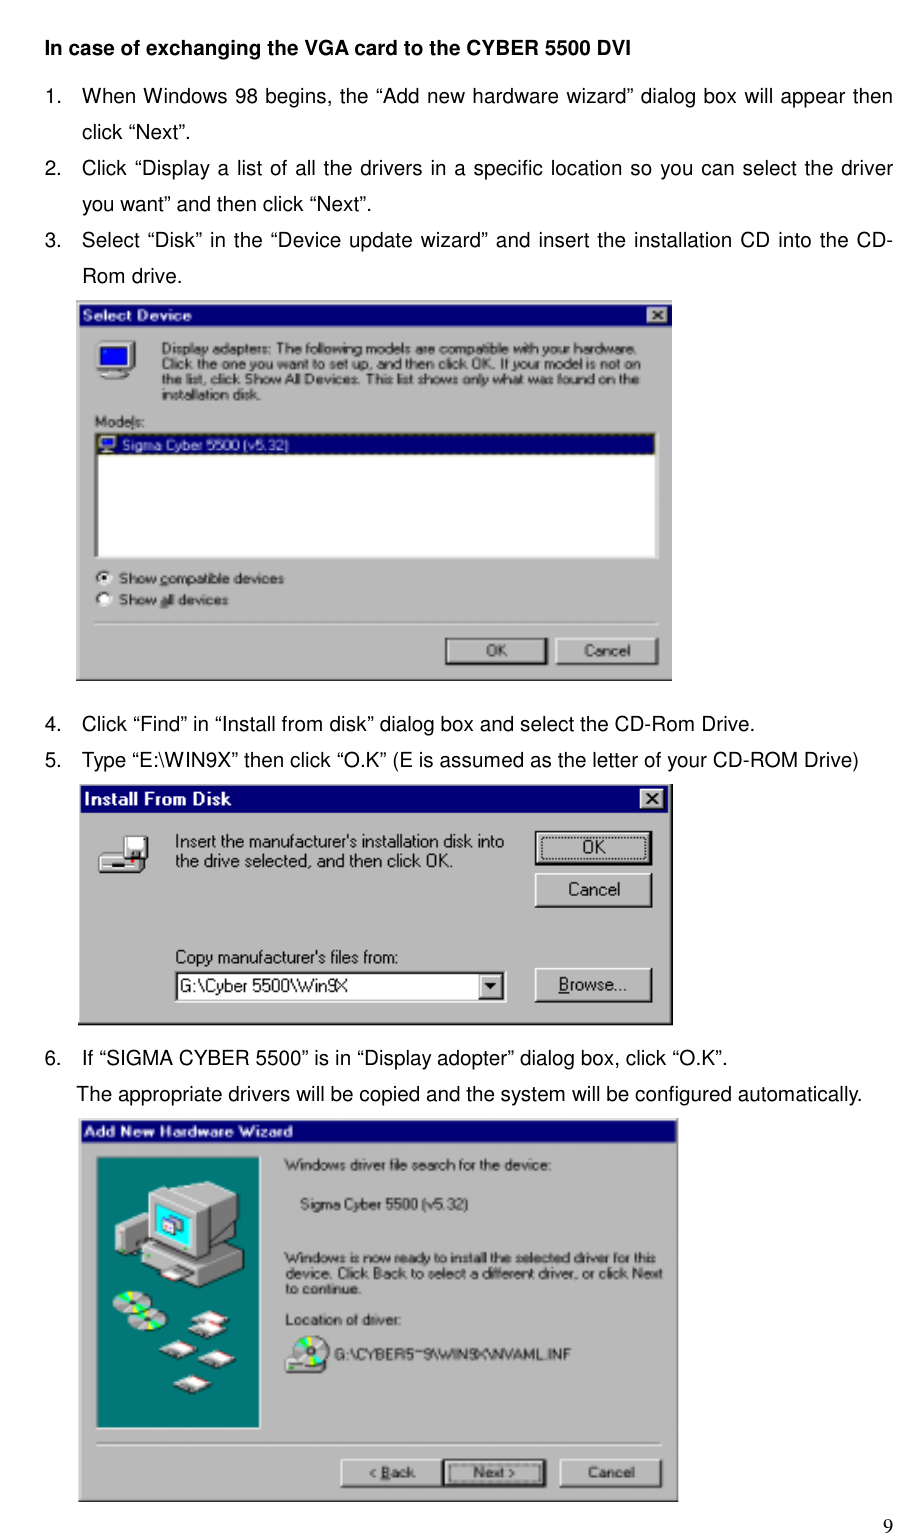     9 In case of exchanging the VGA card to the CYBER 5500 DVI  1.  When Windows 98 begins, the “Add new hardware wizard” dialog box will appear then click “Next”. 2.  Click “Display a list of all the drivers in a specific location so you can select the driver you want” and then click “Next”. 3.  Select “Disk” in the “Device update wizard” and insert the installation CD into the CD-Rom drive.       4.  Click “Find” in “Install from disk” dialog box and select the CD-Rom Drive. 5.  Type “E:\WIN9X” then click “O.K” (E is assumed as the letter of your CD-ROM Drive)           6.  If “SIGMA CYBER 5500” is in “Display adopter” dialog box, click “O.K”.               The appropriate drivers will be copied and the system will be configured automatically.       